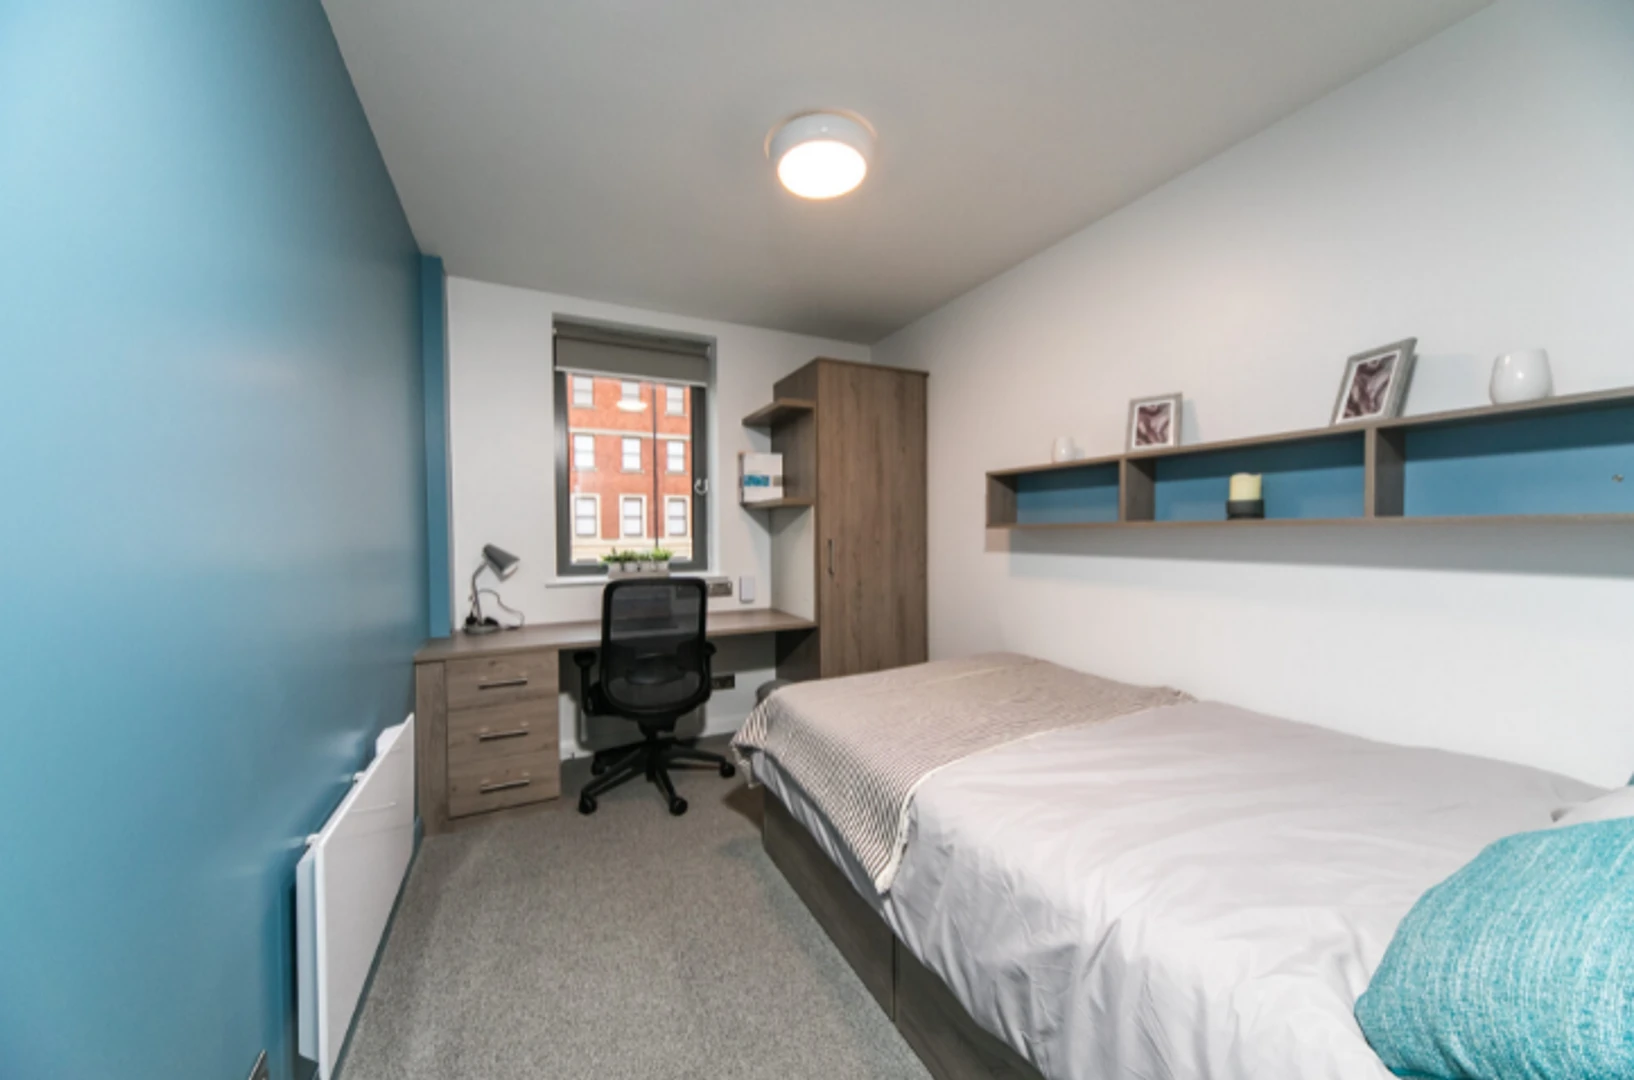 Cheap private room in Reading